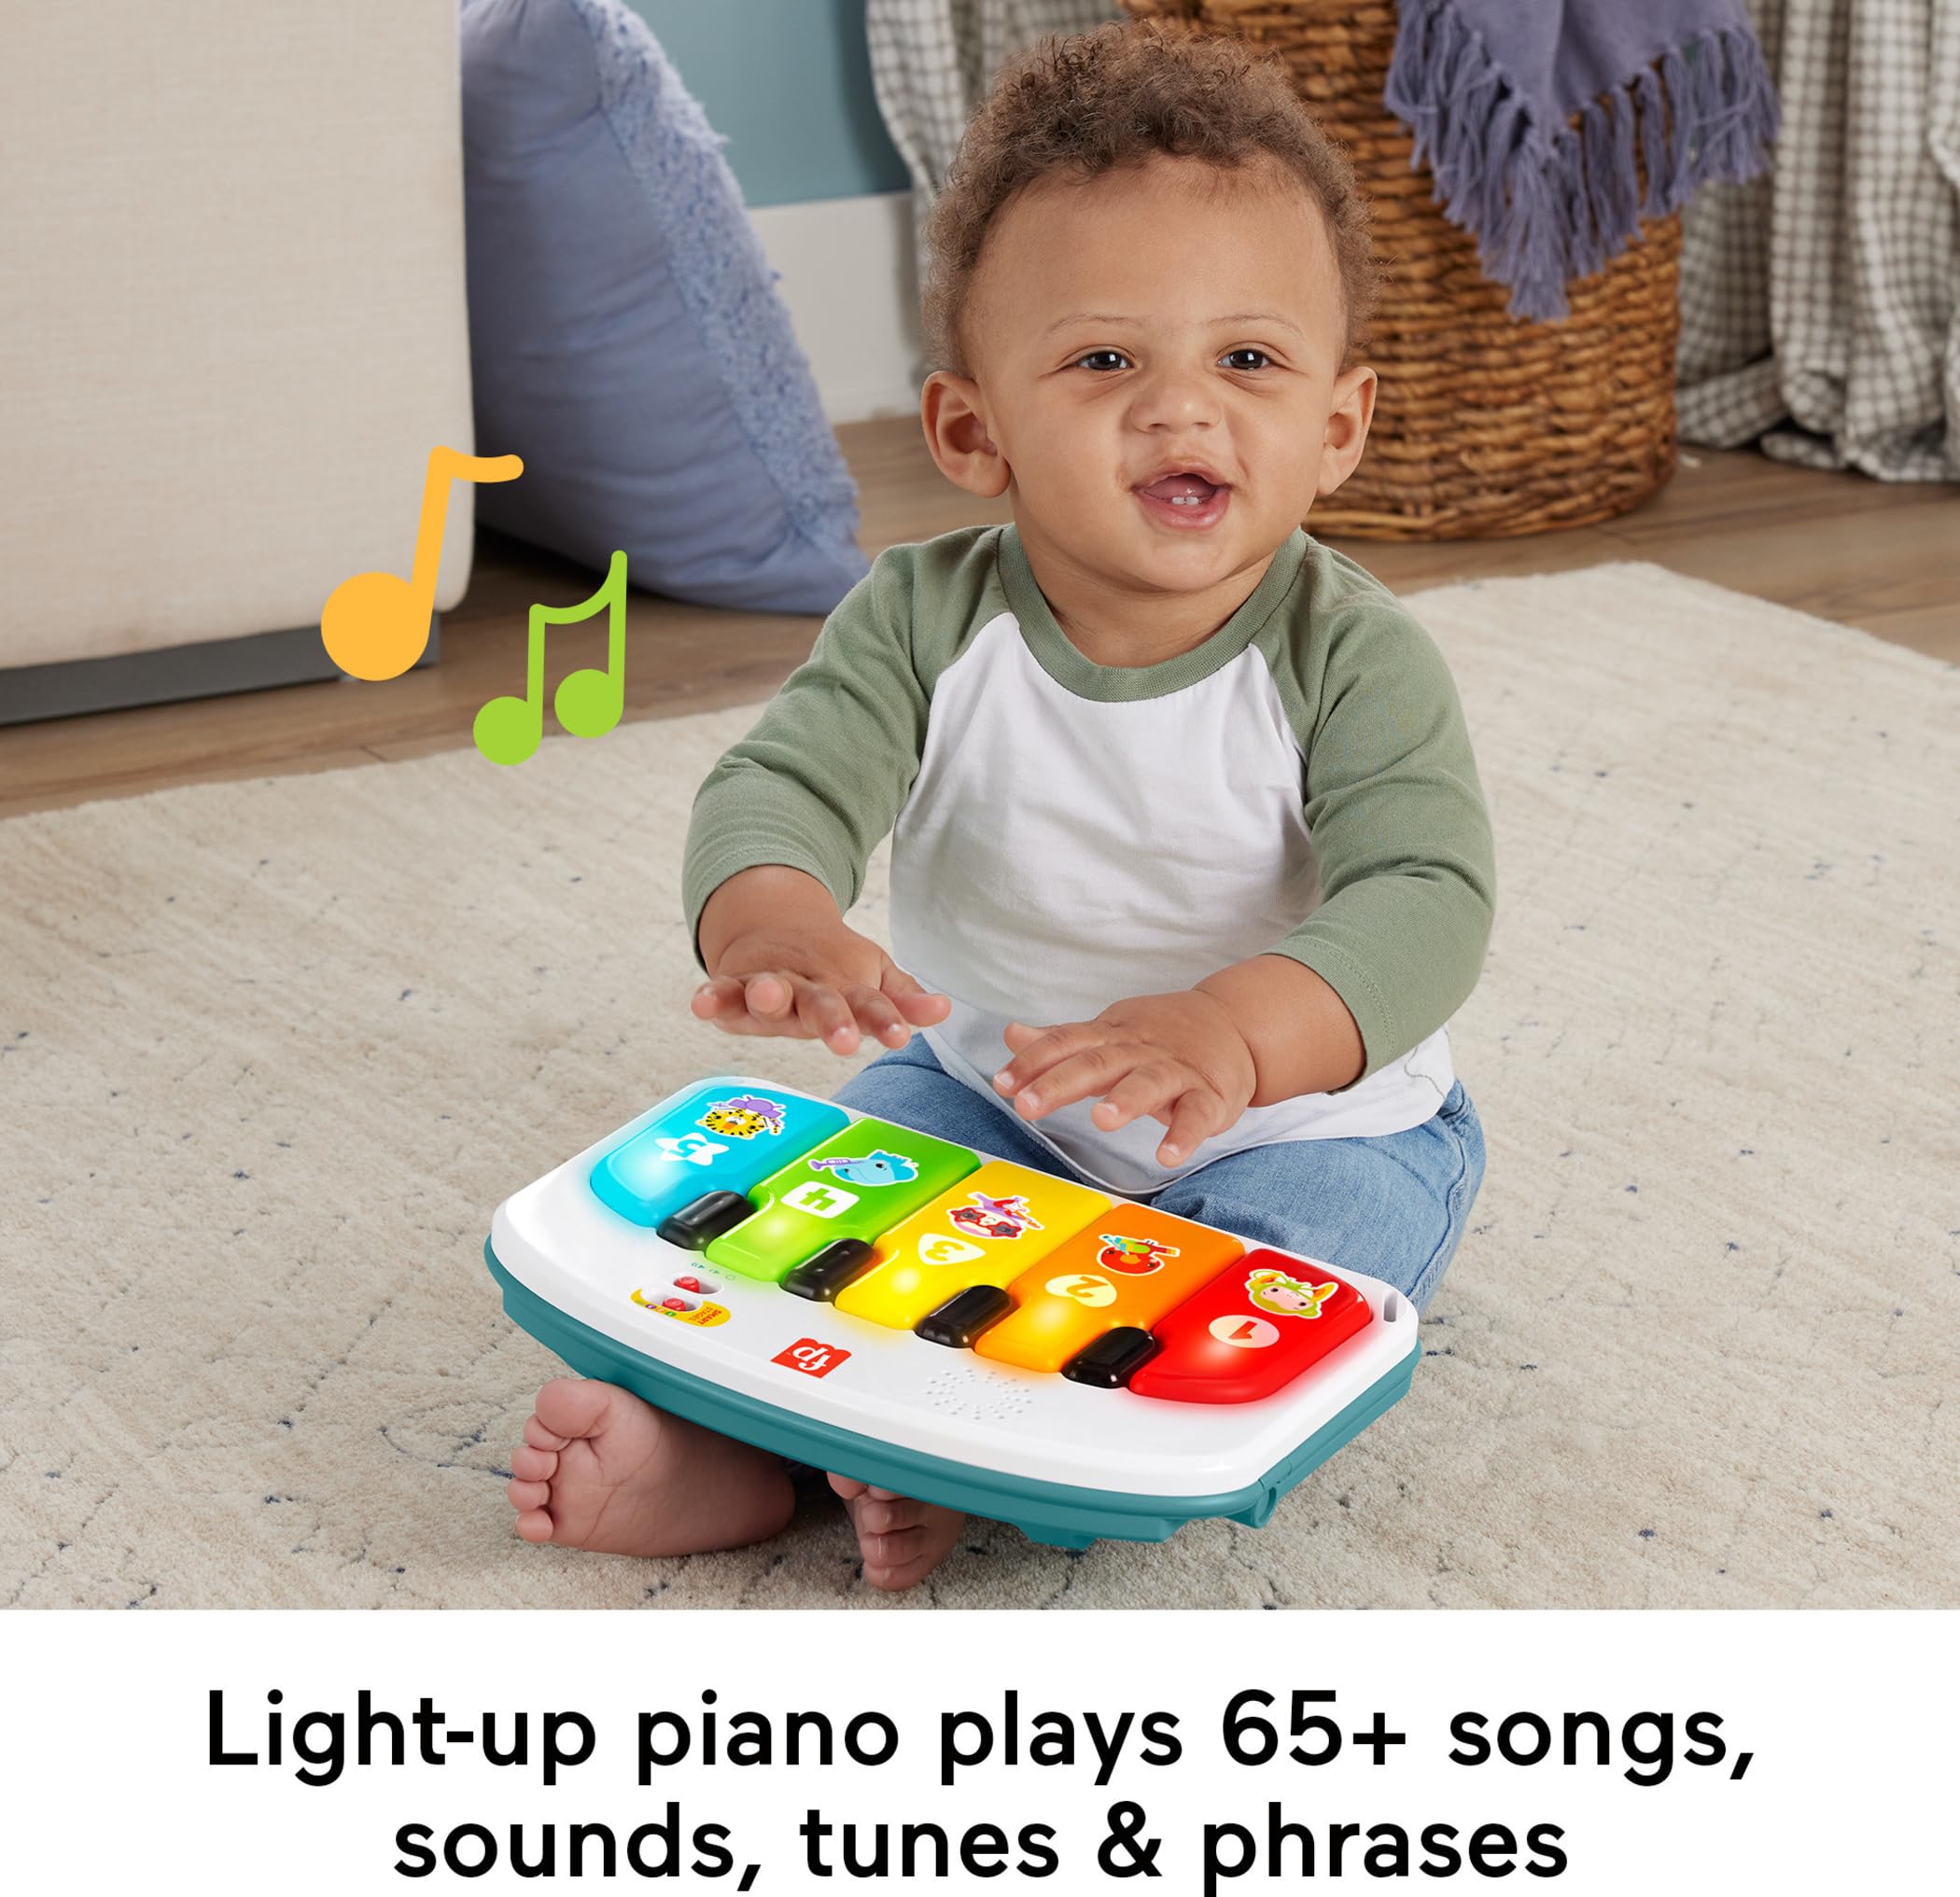 Fisher-Price Baby Portable Chair Deluxe Kick & Play Sit-Me-Up Floor Seat with Piano Learning Toy & Snack Tray for Infants to Toddlers